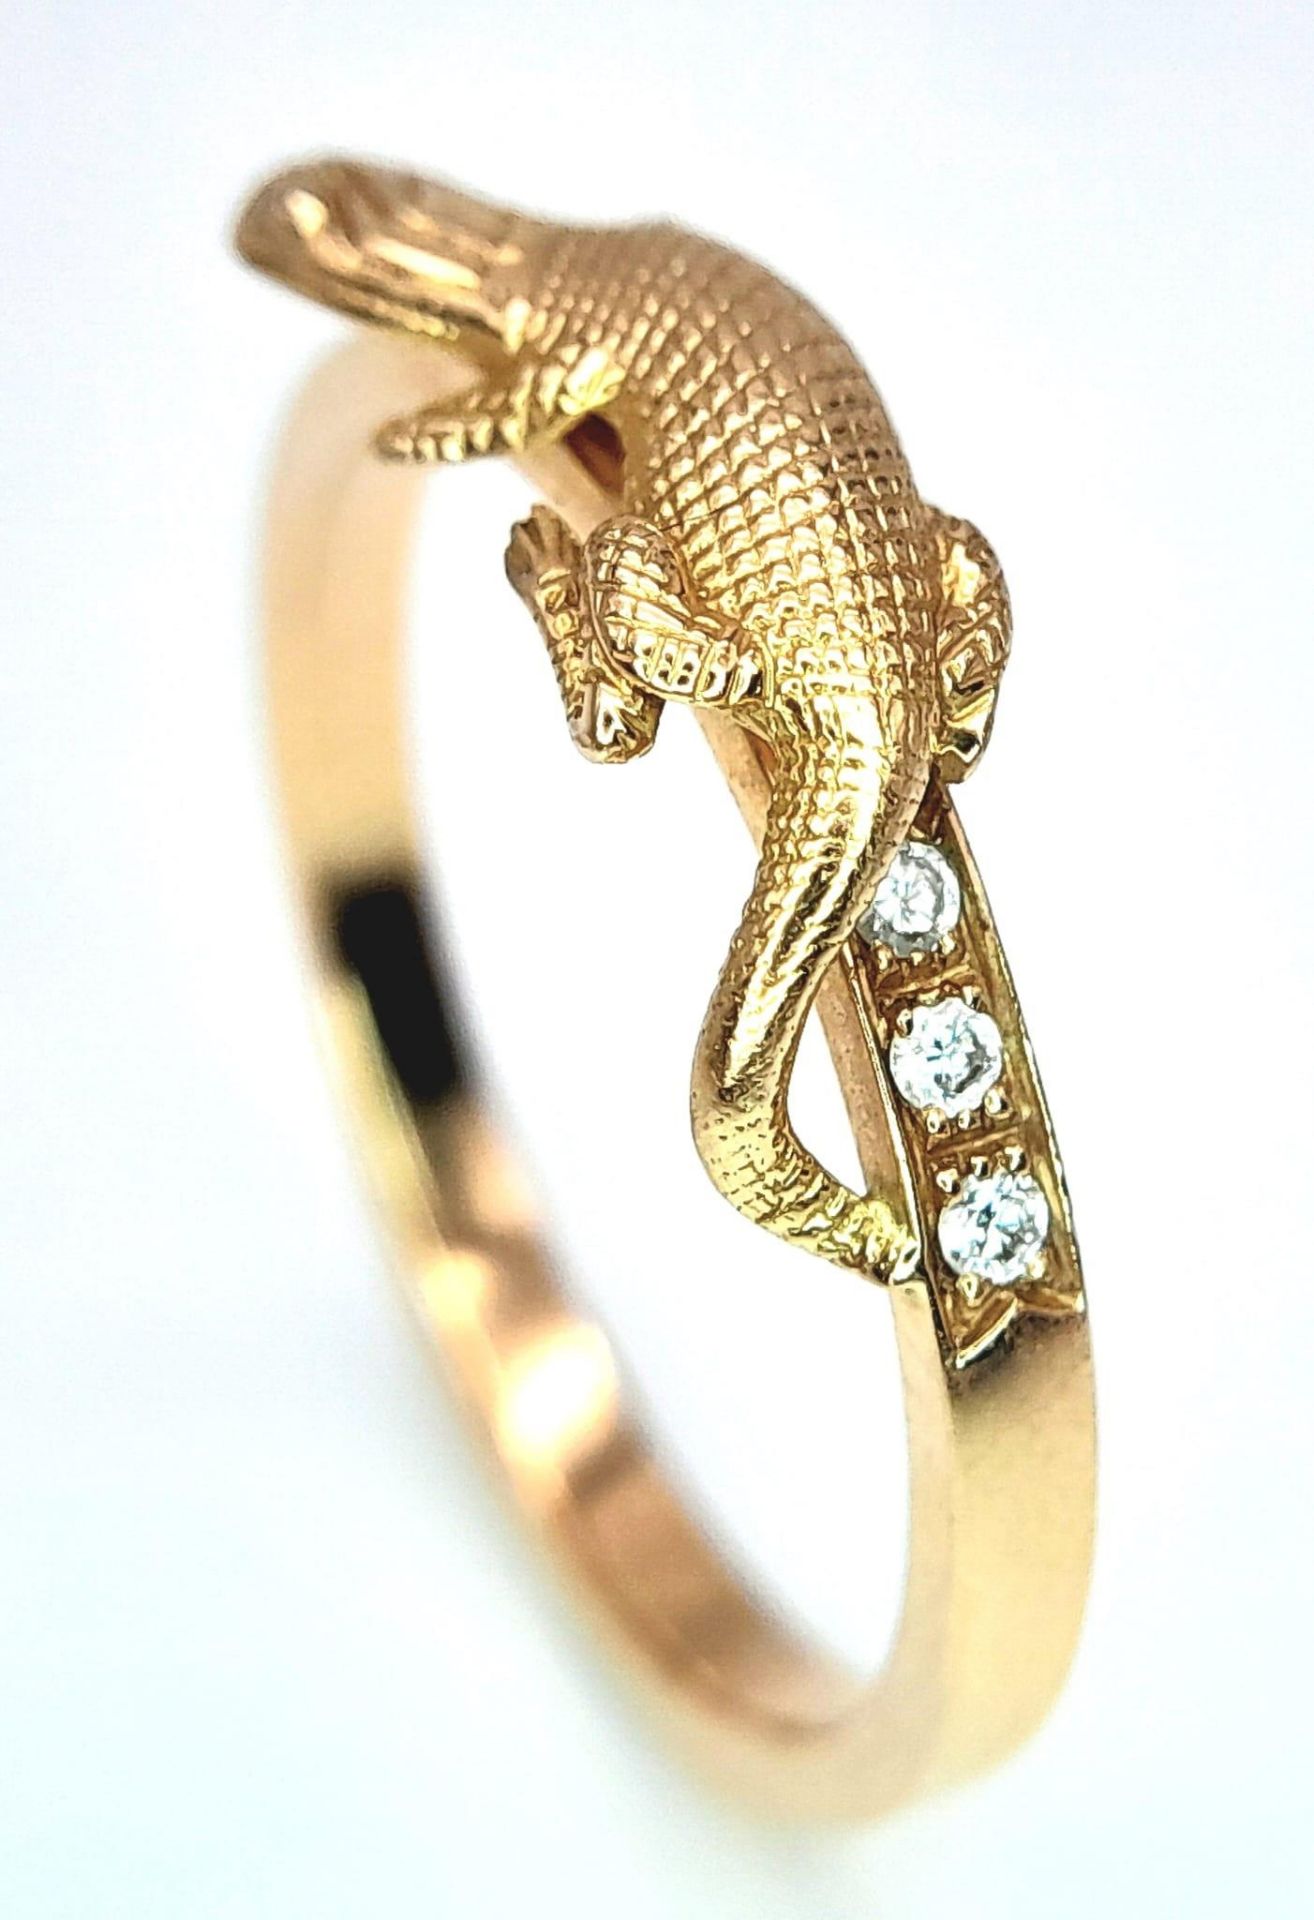 AN 18K YELLOW GOLD, THEO FENNELL (DESIGNER) DIAMOND SET LIZARD RING. 3G. SIZE M - Image 4 of 6